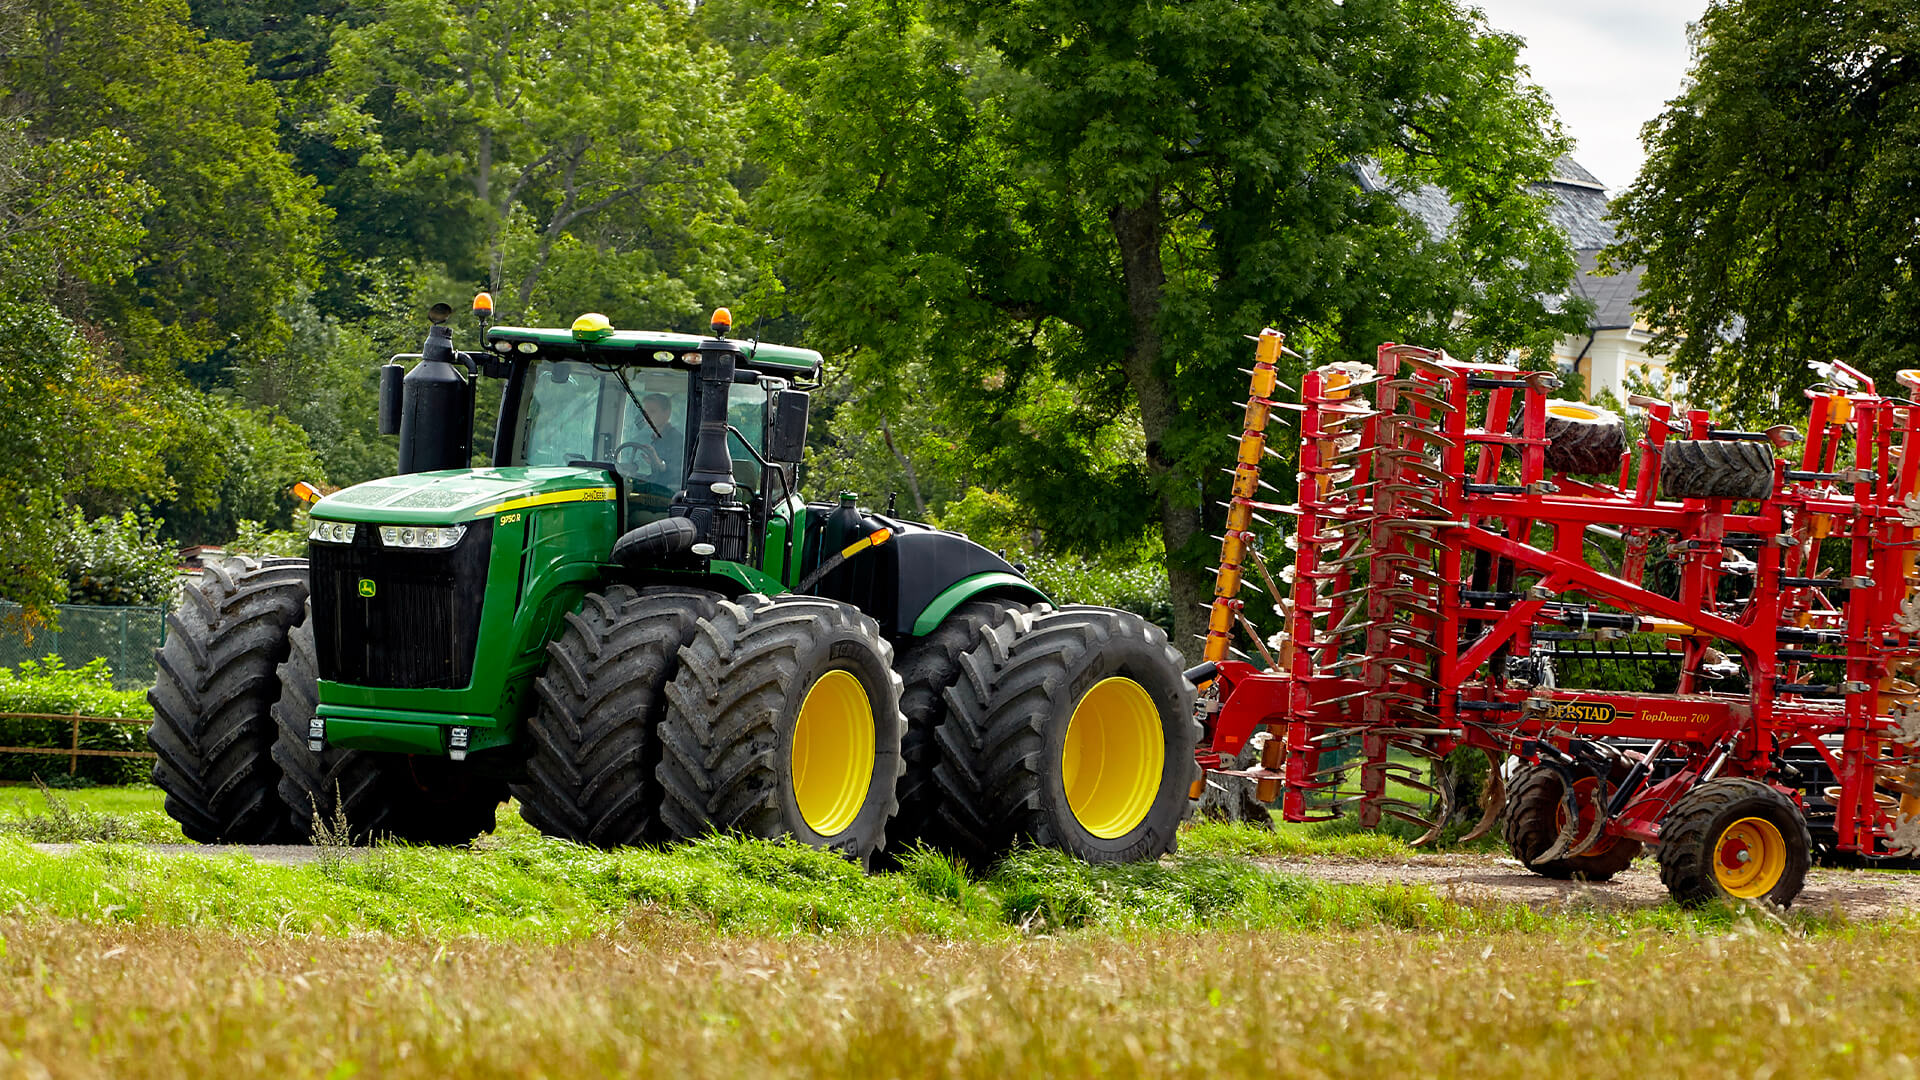 How to improve a tractor’s fuel economy?